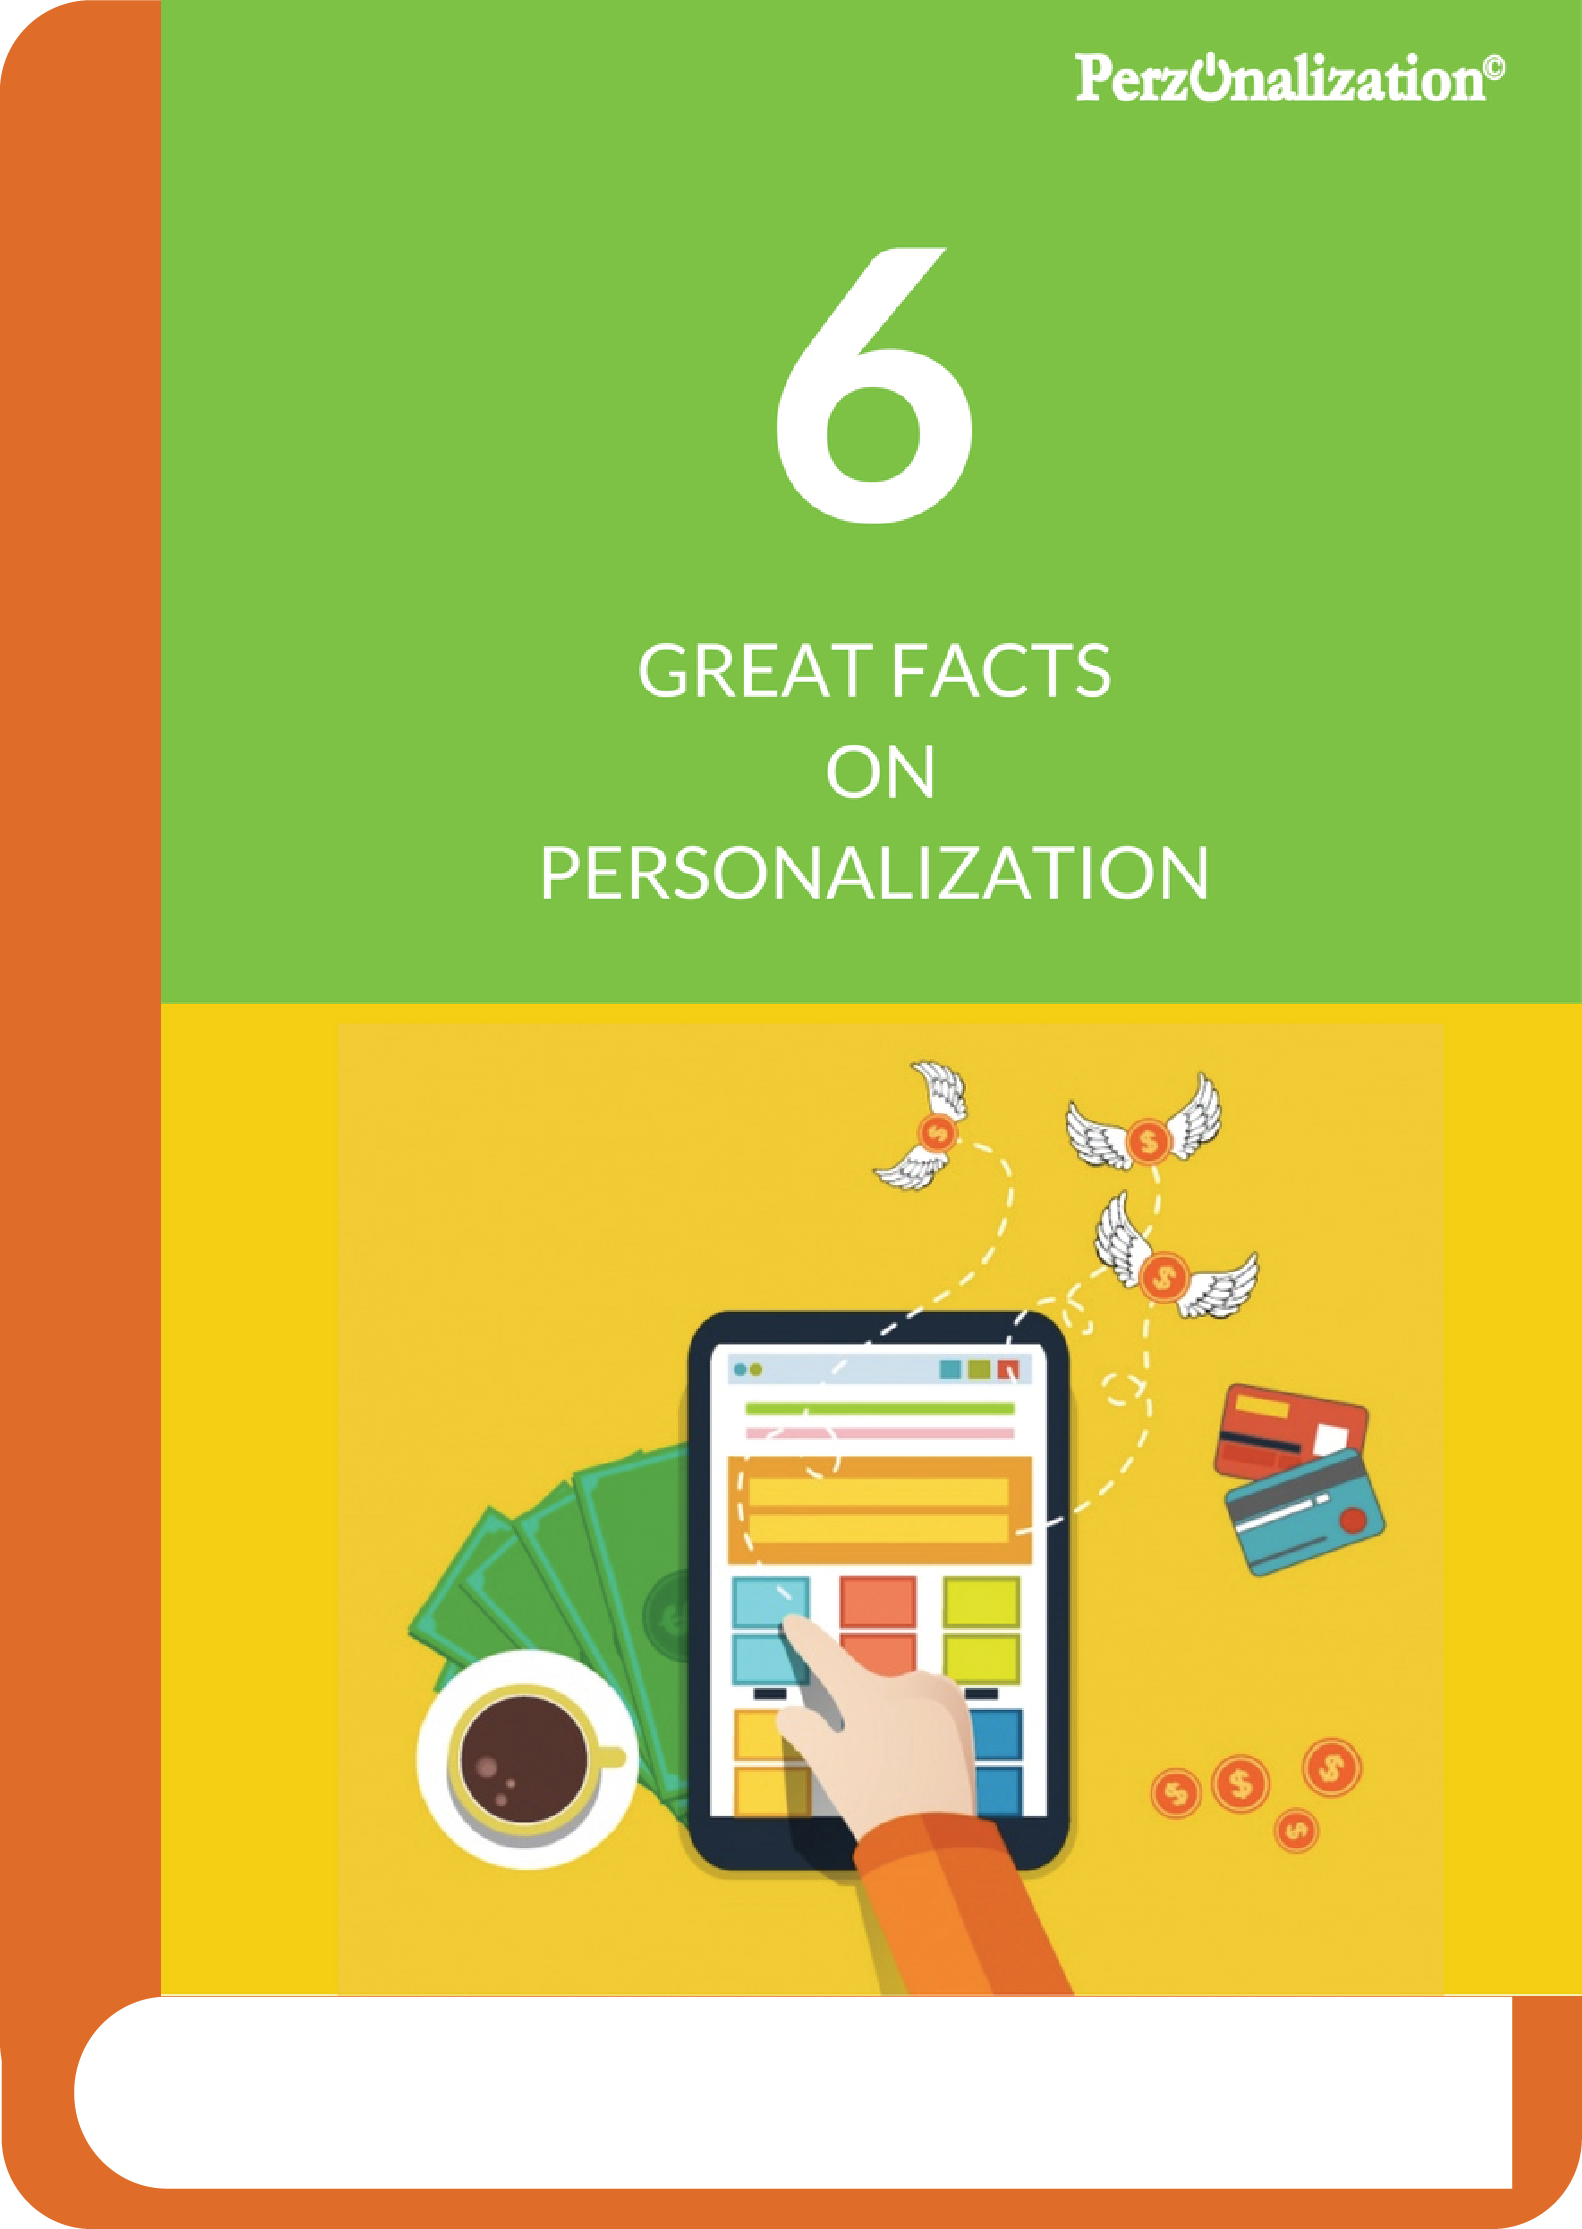 This eBooks includes several research results on personalization and points to some interesting facts ie. what effect personalization has on the open rate of emails.